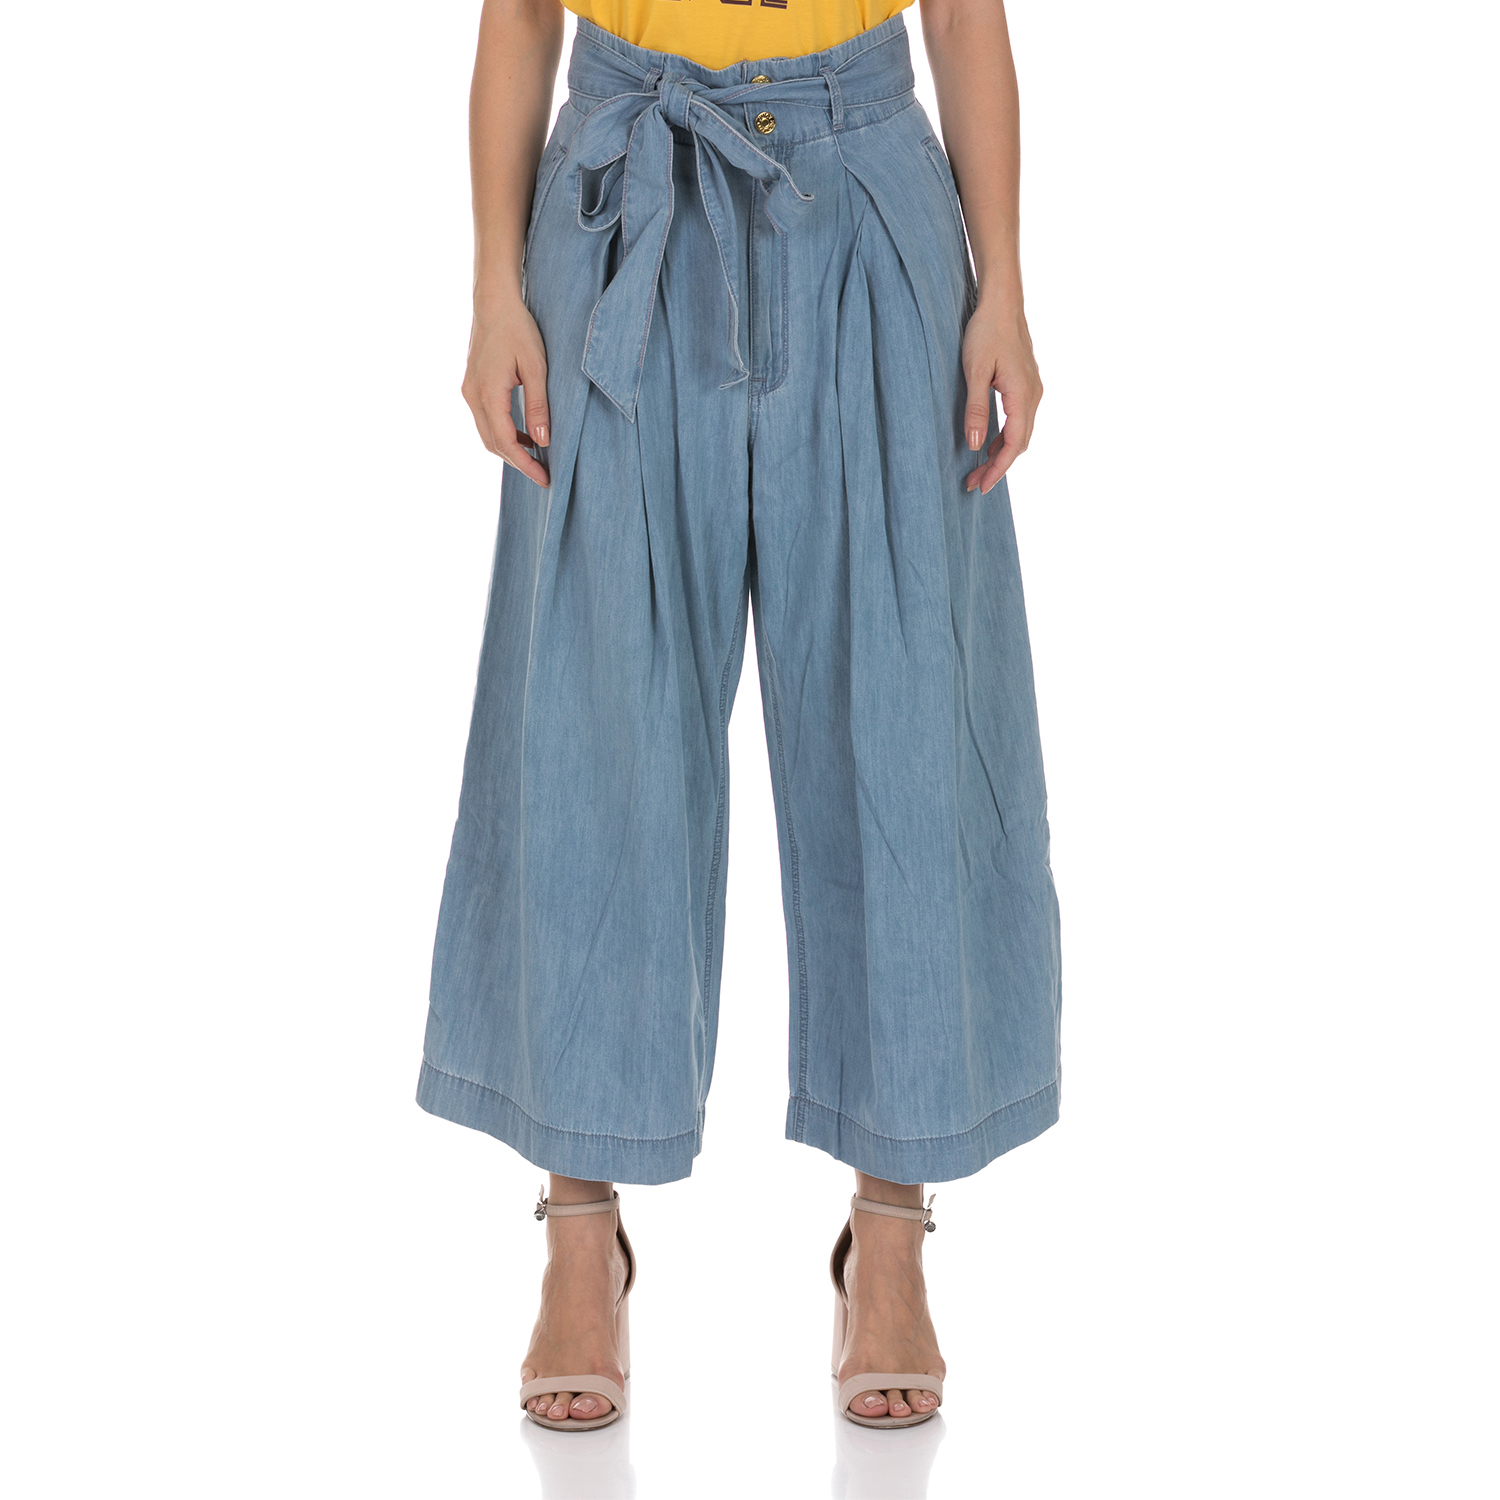 JUICY COUTURE Γυναικεία παντελόνα JUICY COUTURE CHAMBRAY CROP γαλάζια